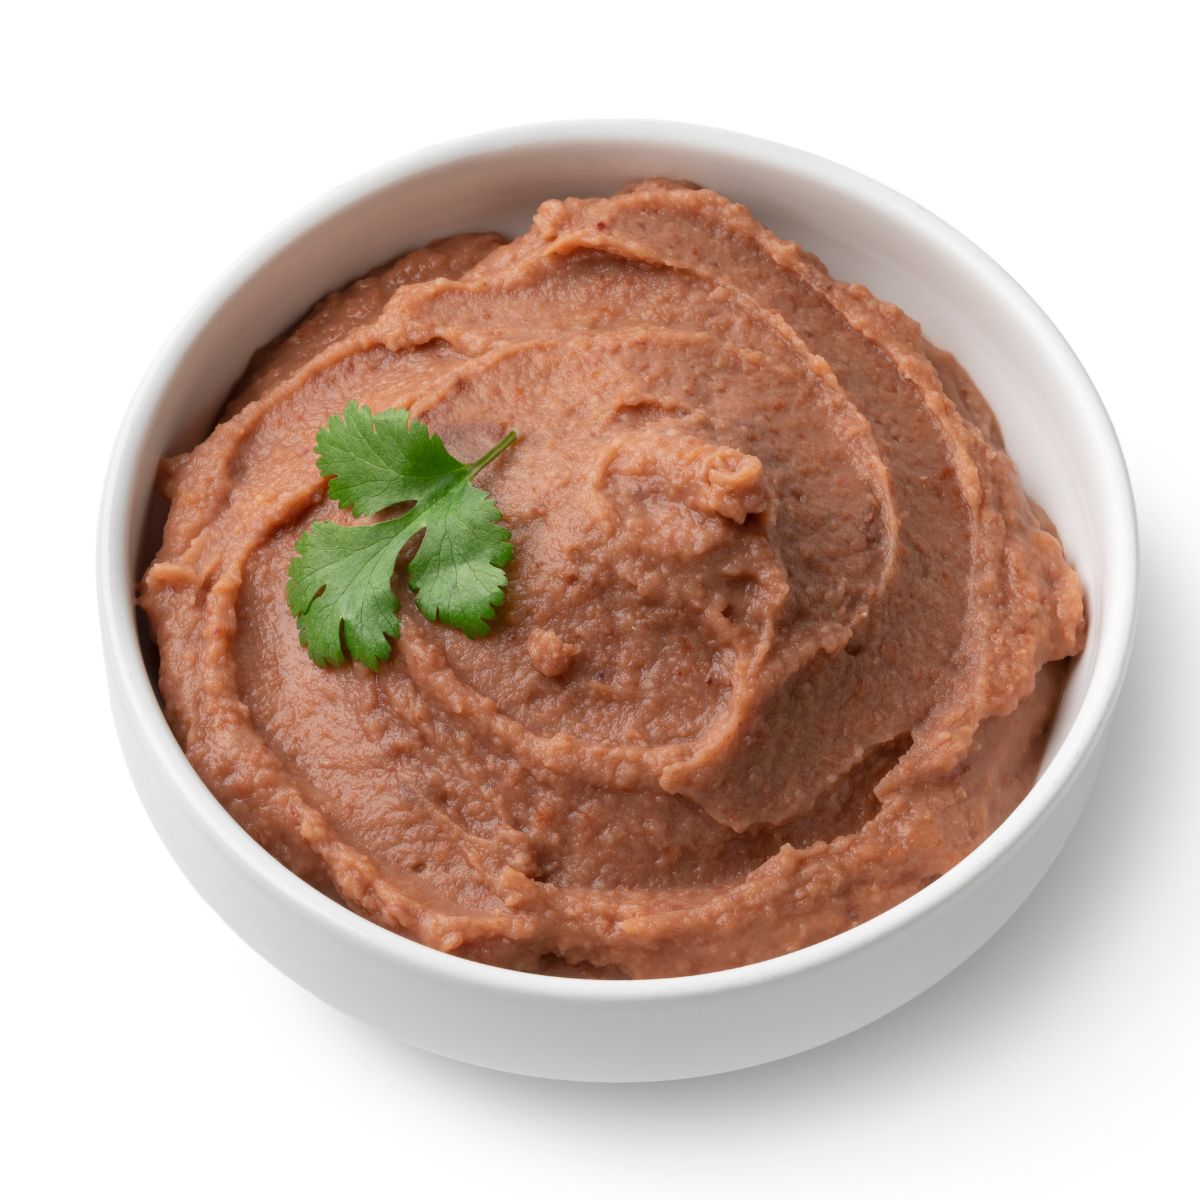 A bowl of refried beans on a white background.